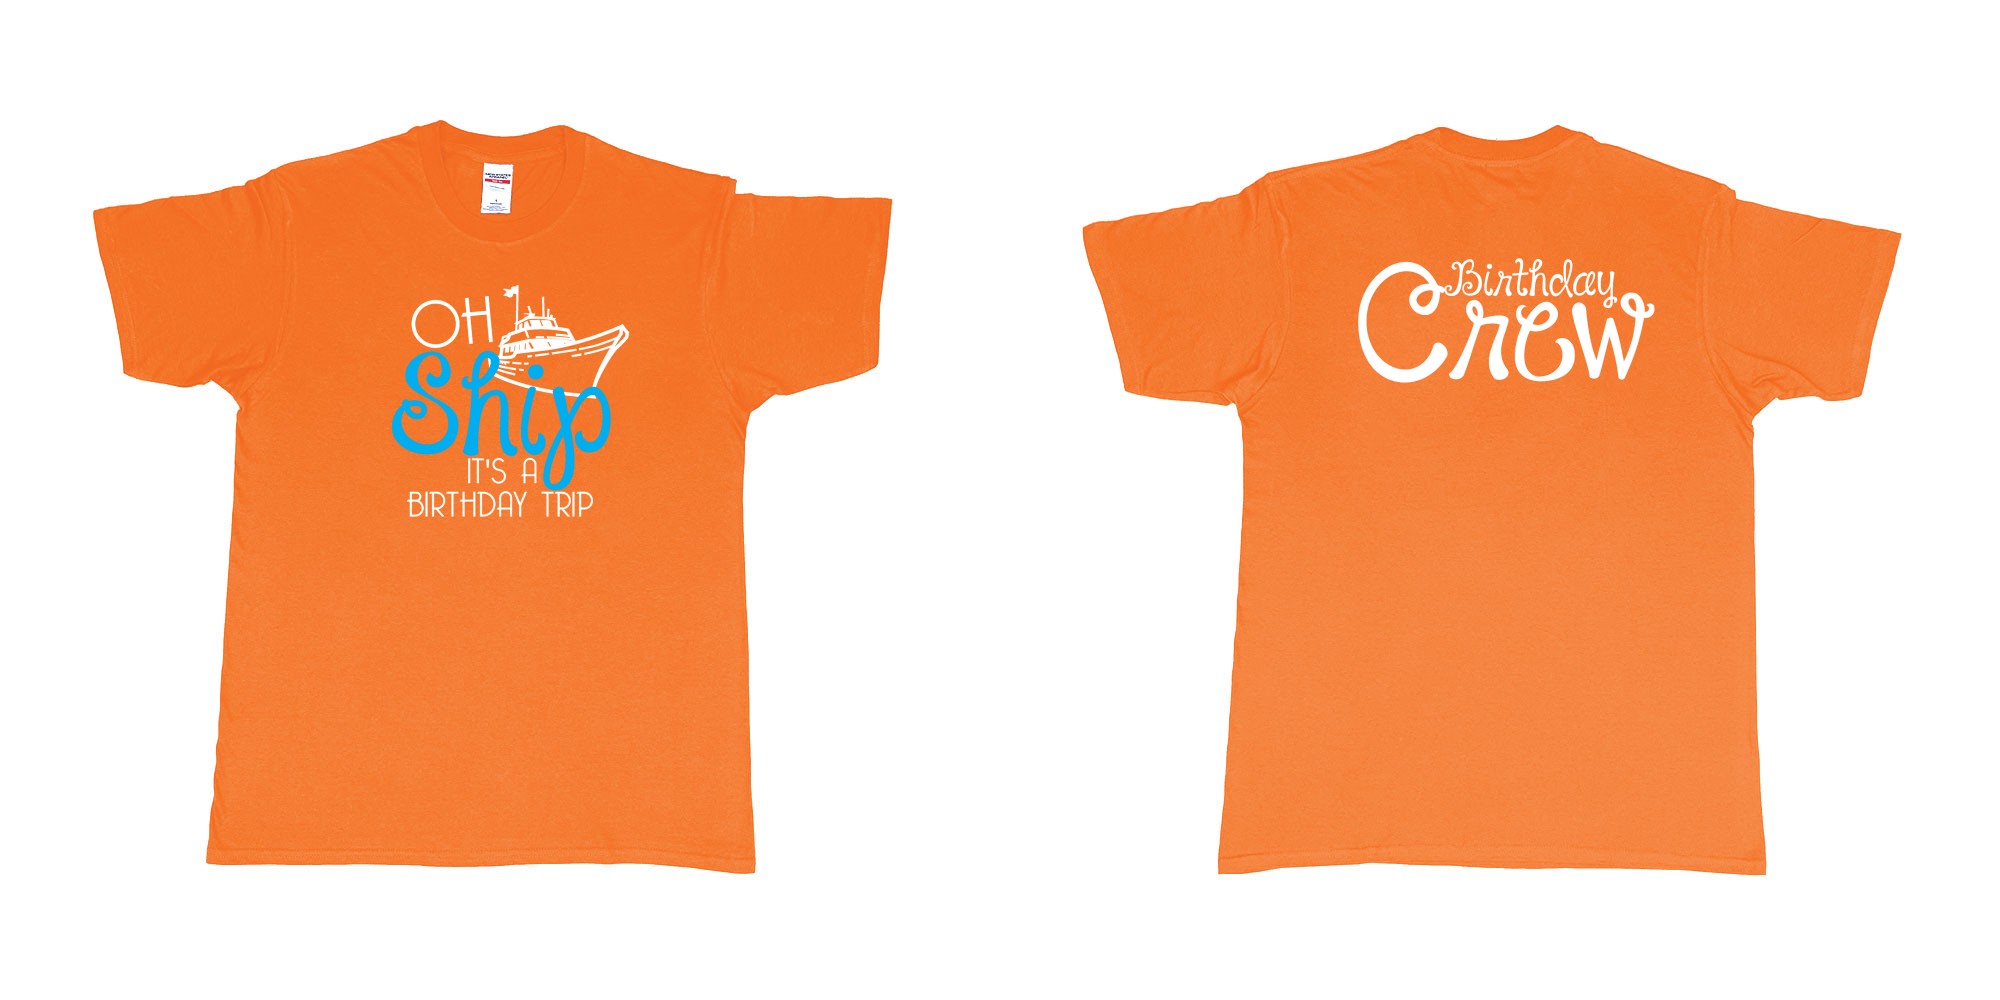 Custom tshirt design Birthday Oh Ship in fabric color orange choice your own text made in Bali by The Pirate Way